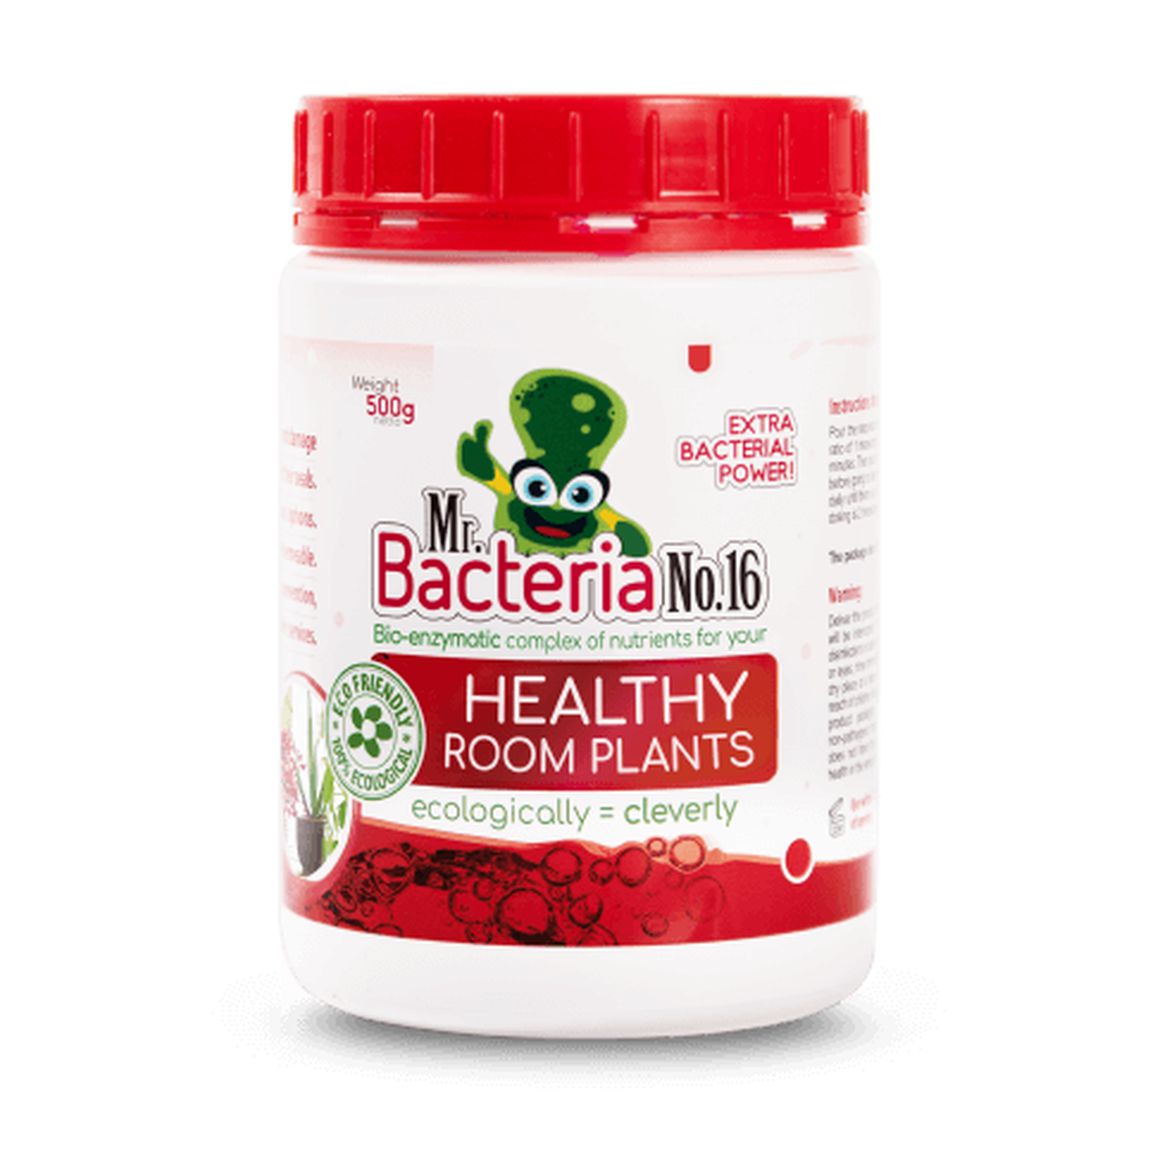 Bio-enzymatic complex of nutrients for your HEALTHY ROOM PLANTS 500g